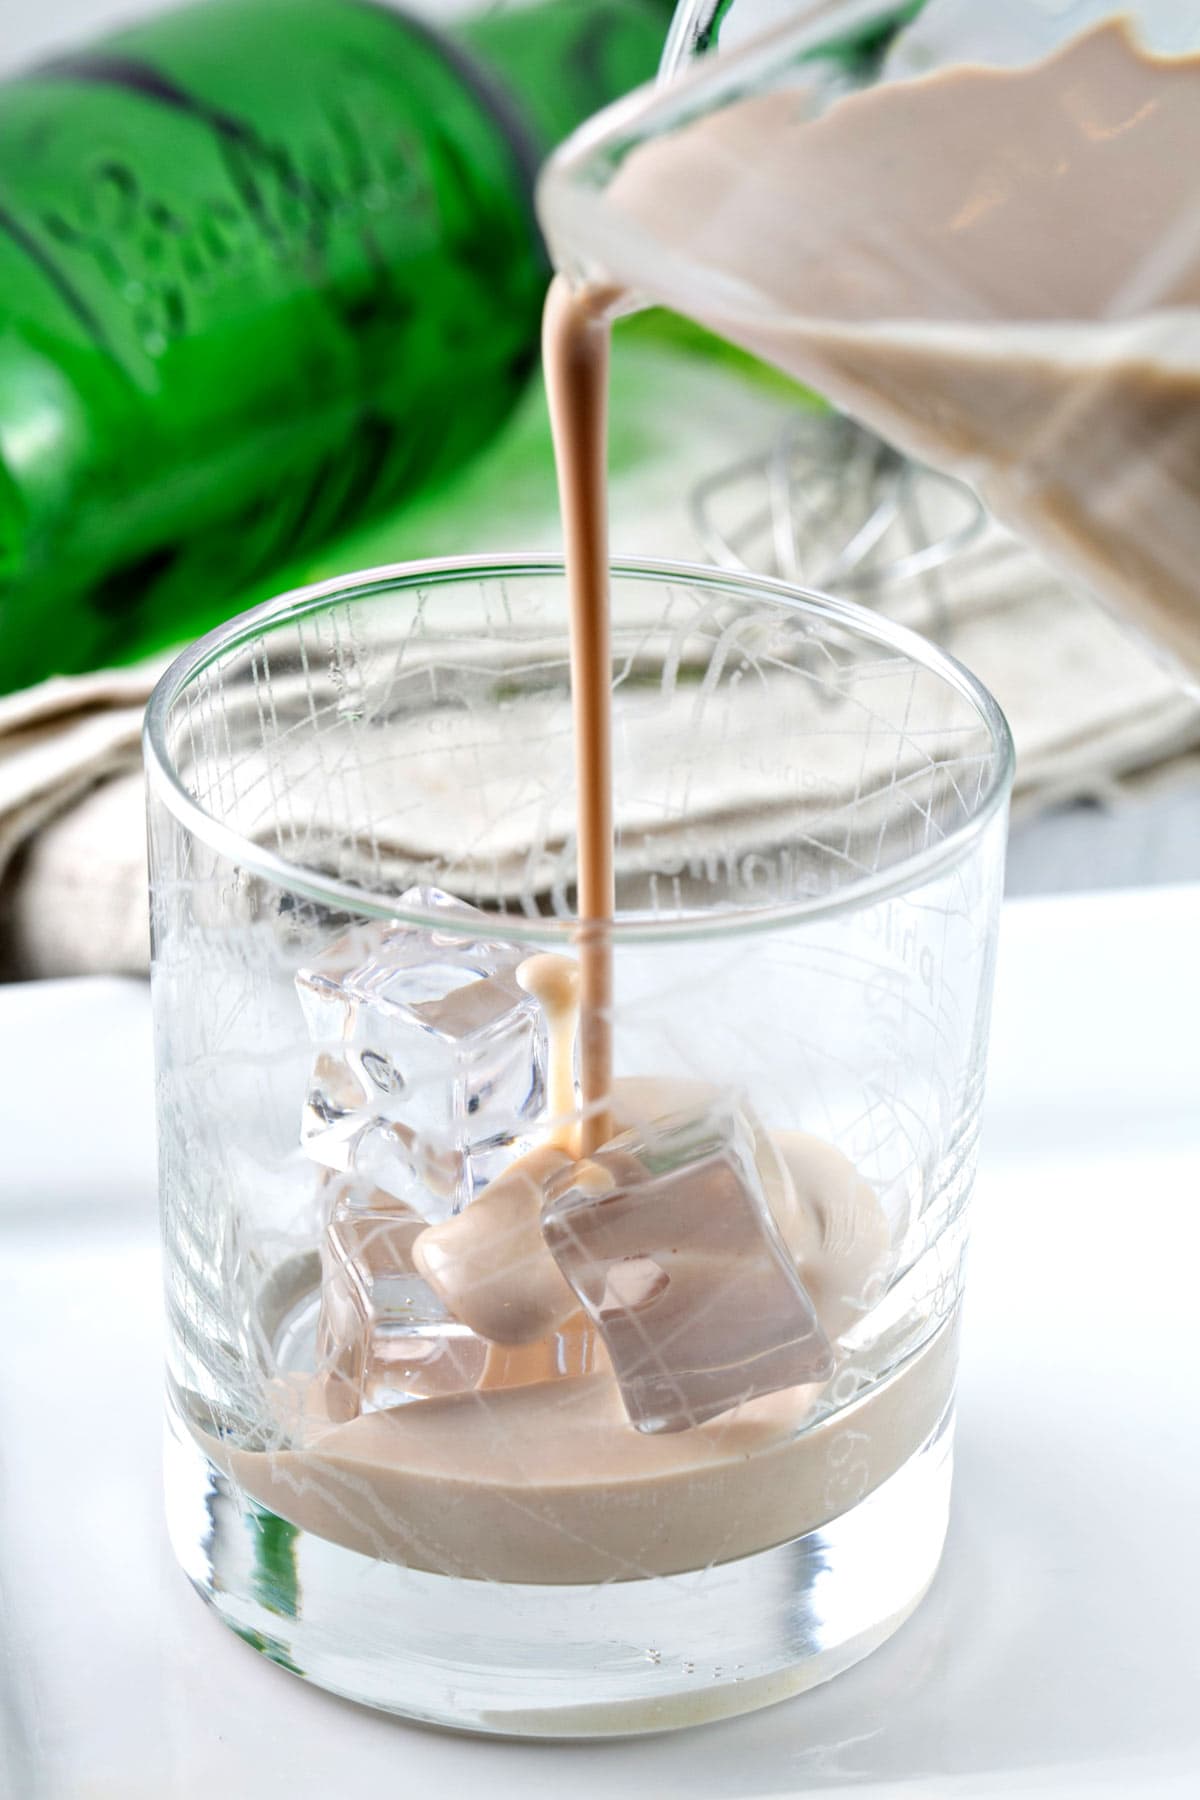 pouring irish cream from a small pitcher into a rocks glass with ice cubes